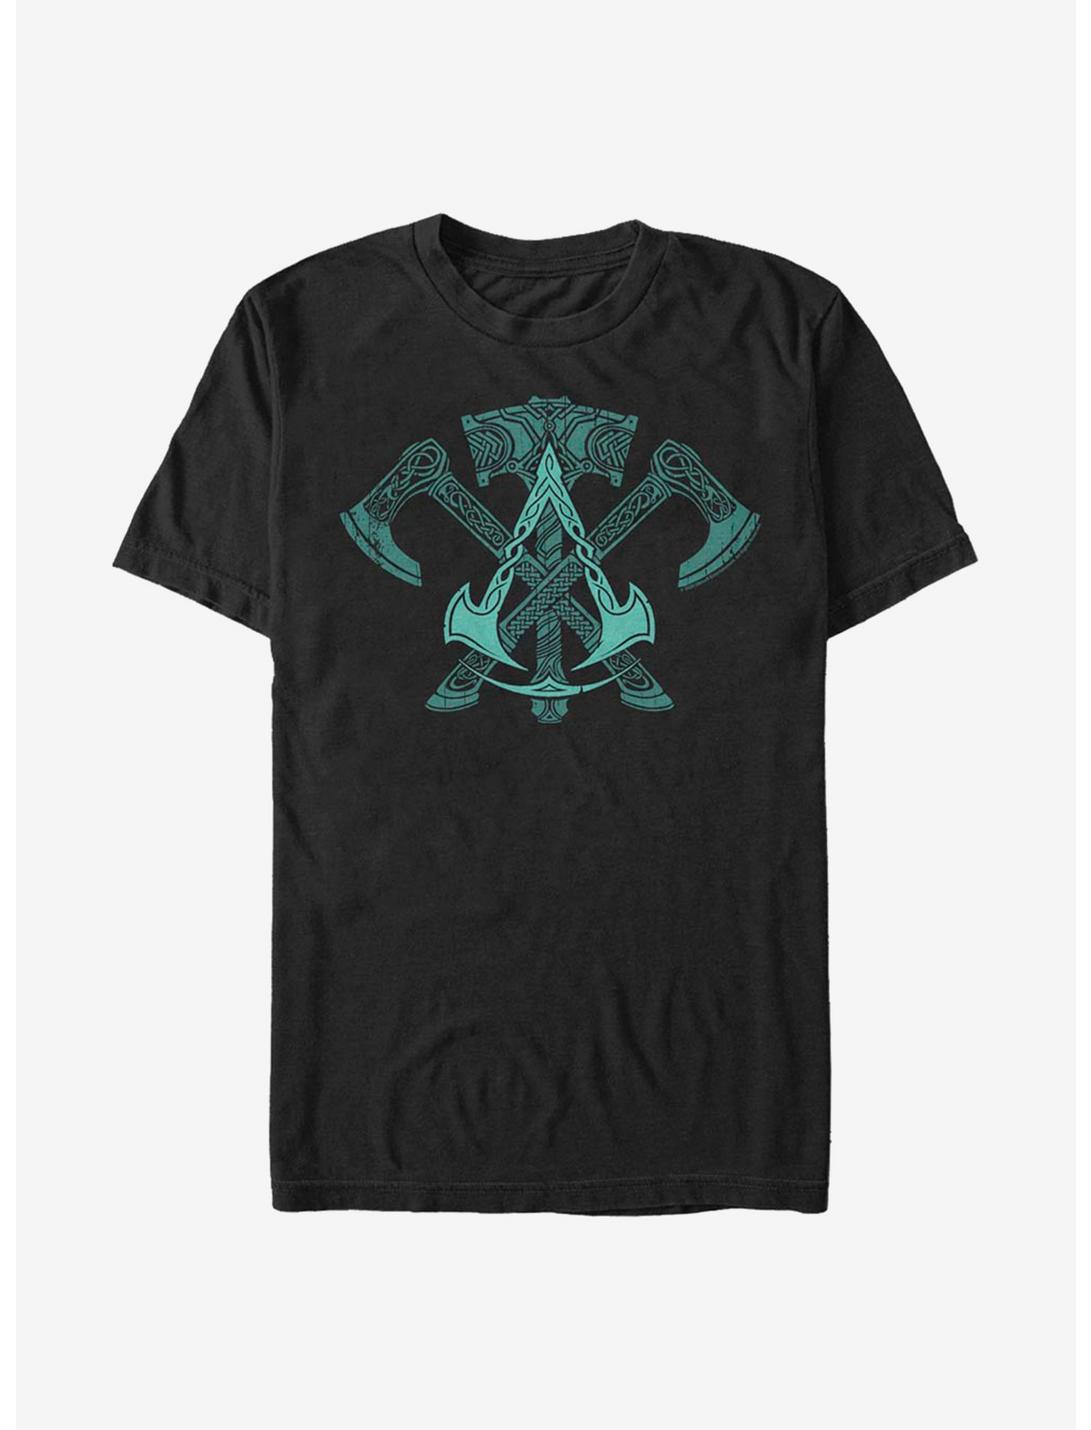 Assassin's Creed Valhalla Axes Symbol T-Shirt - BLACK | BoxLunch